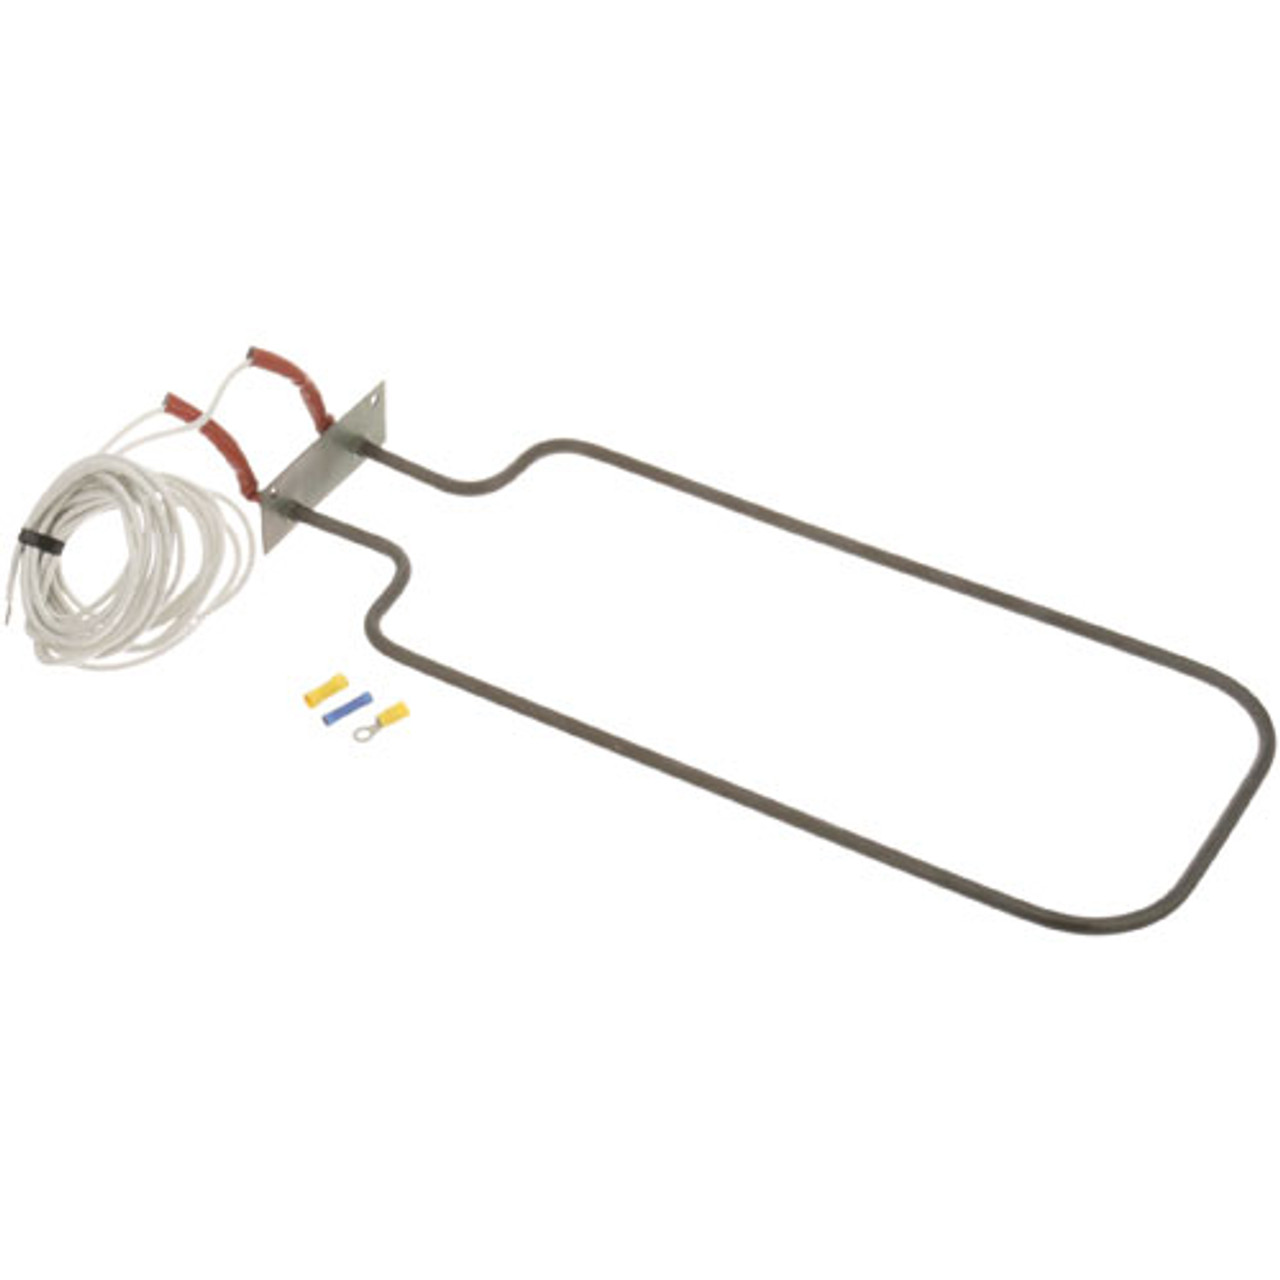 Heating Element - 120V/1Kw - Replacement Part For Wittco WP105-1